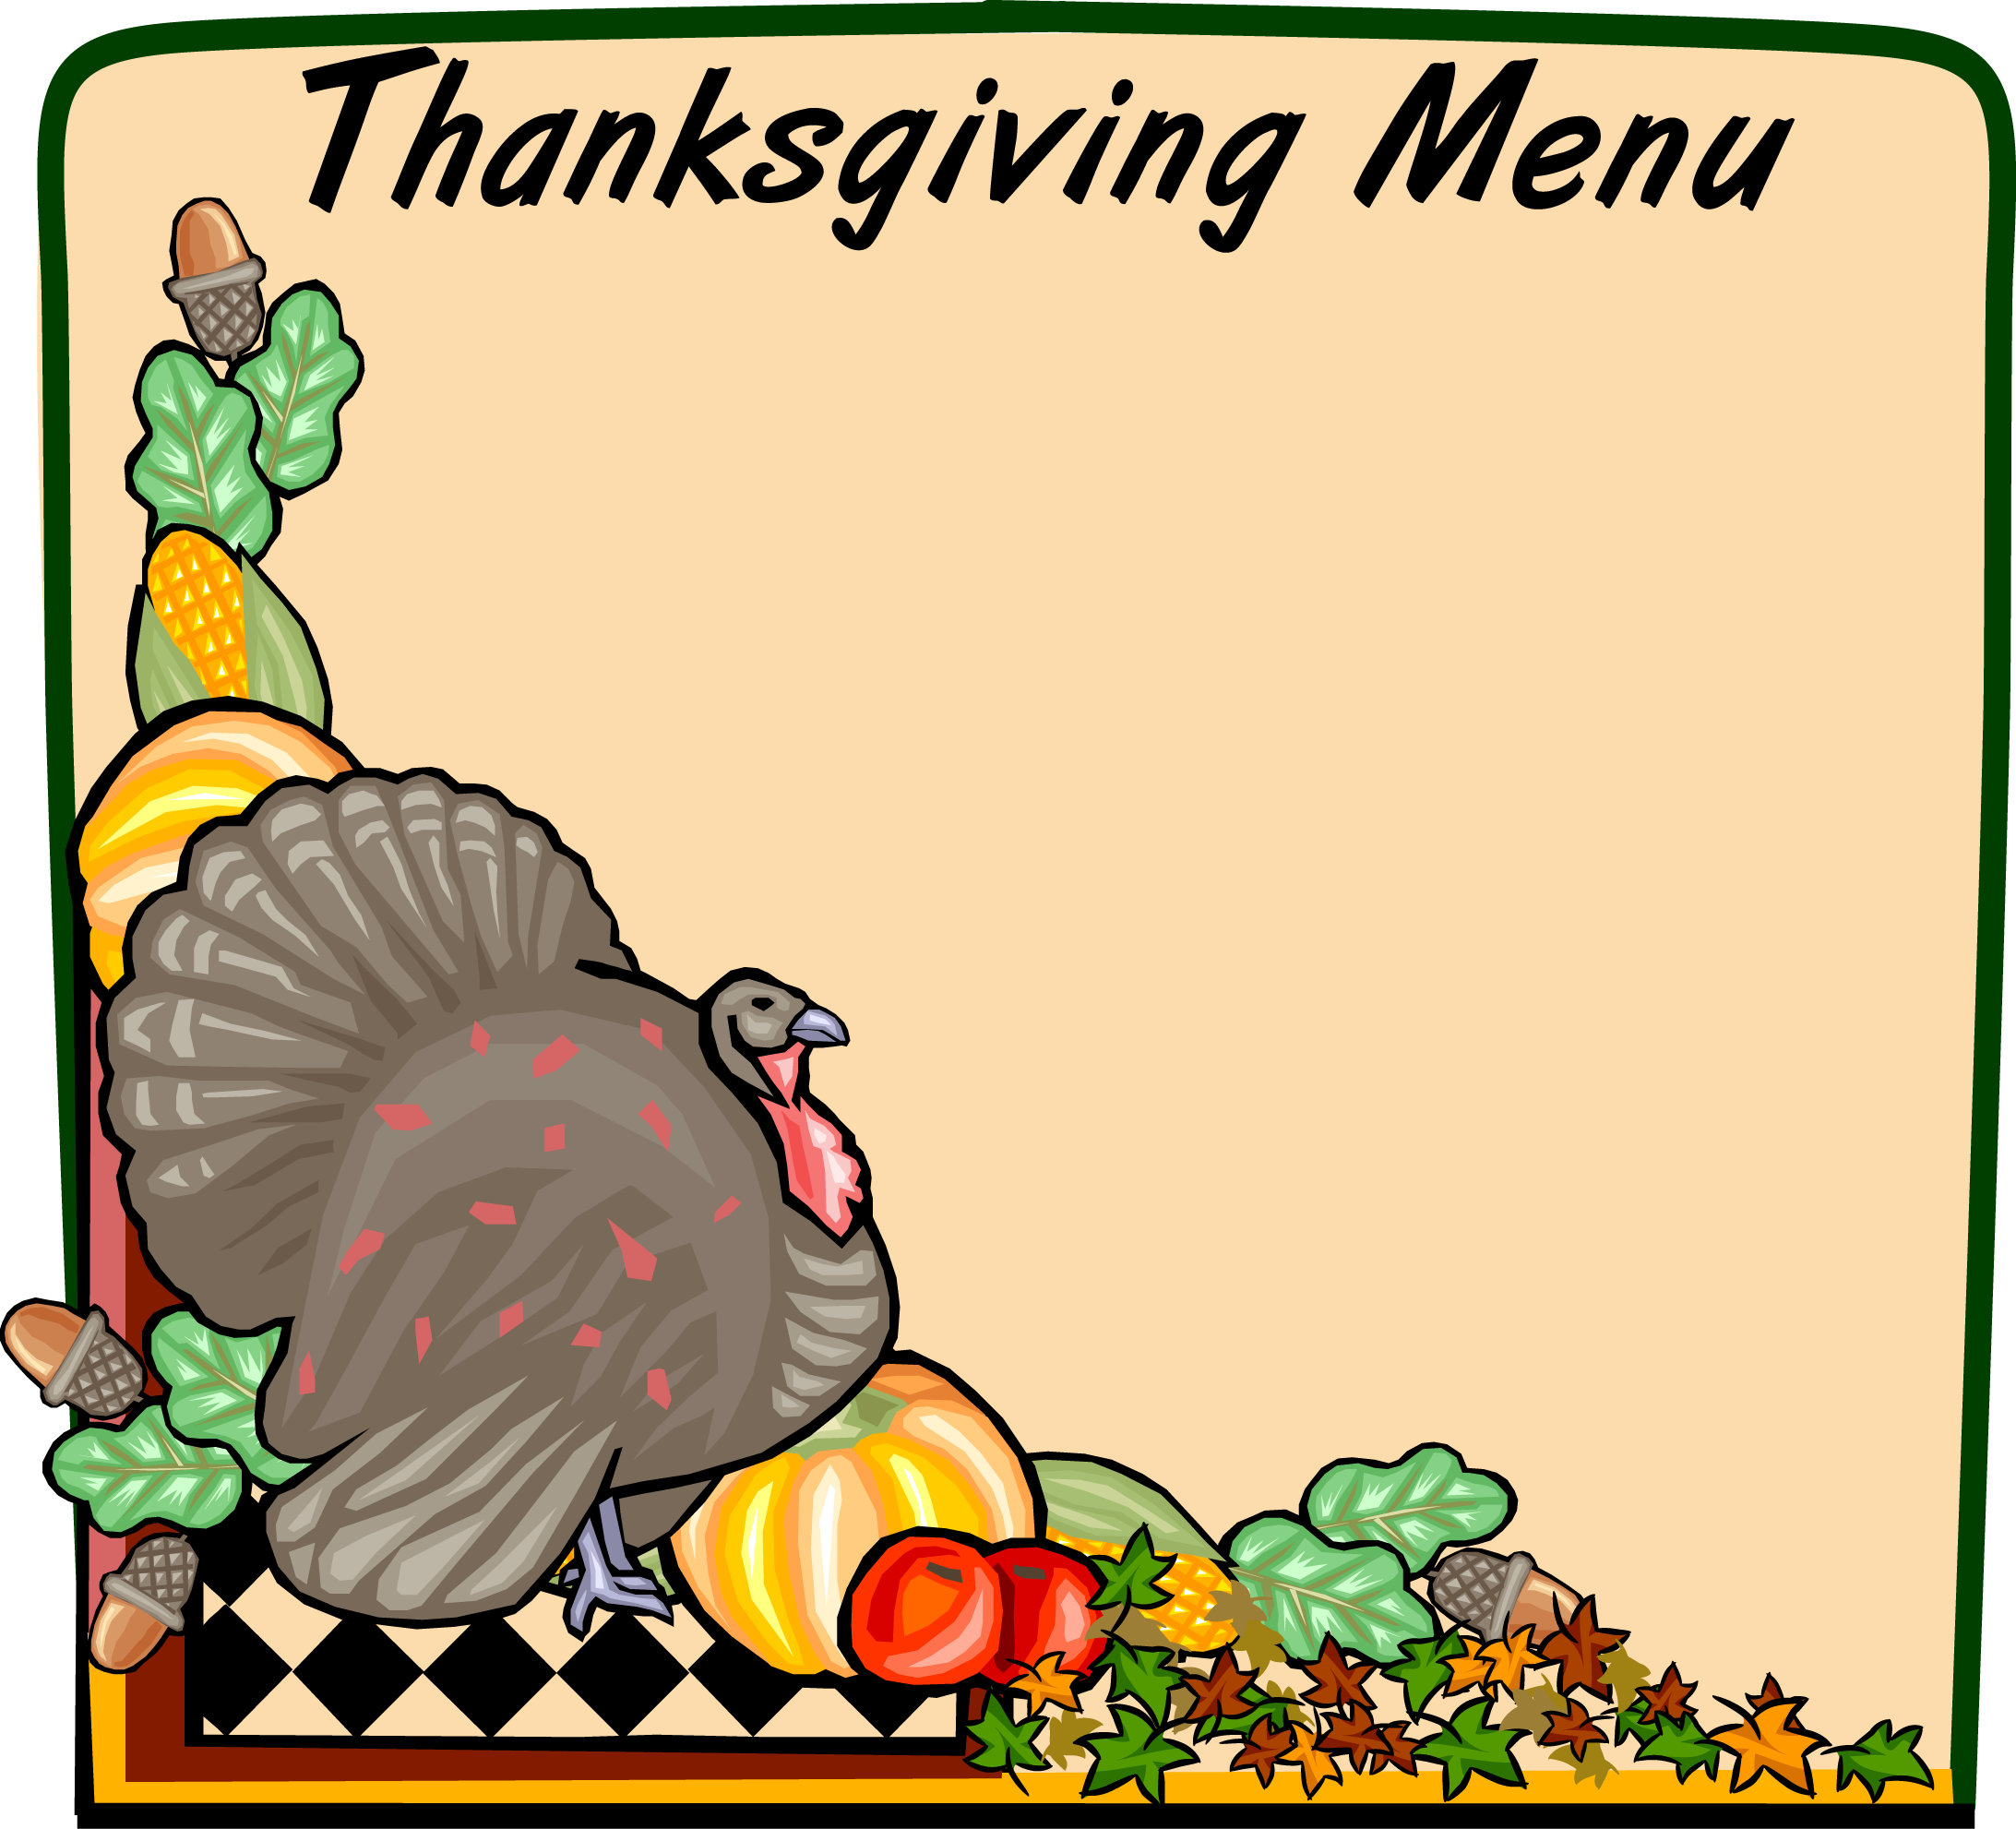 free thanksgiving clip art and borders - photo #23